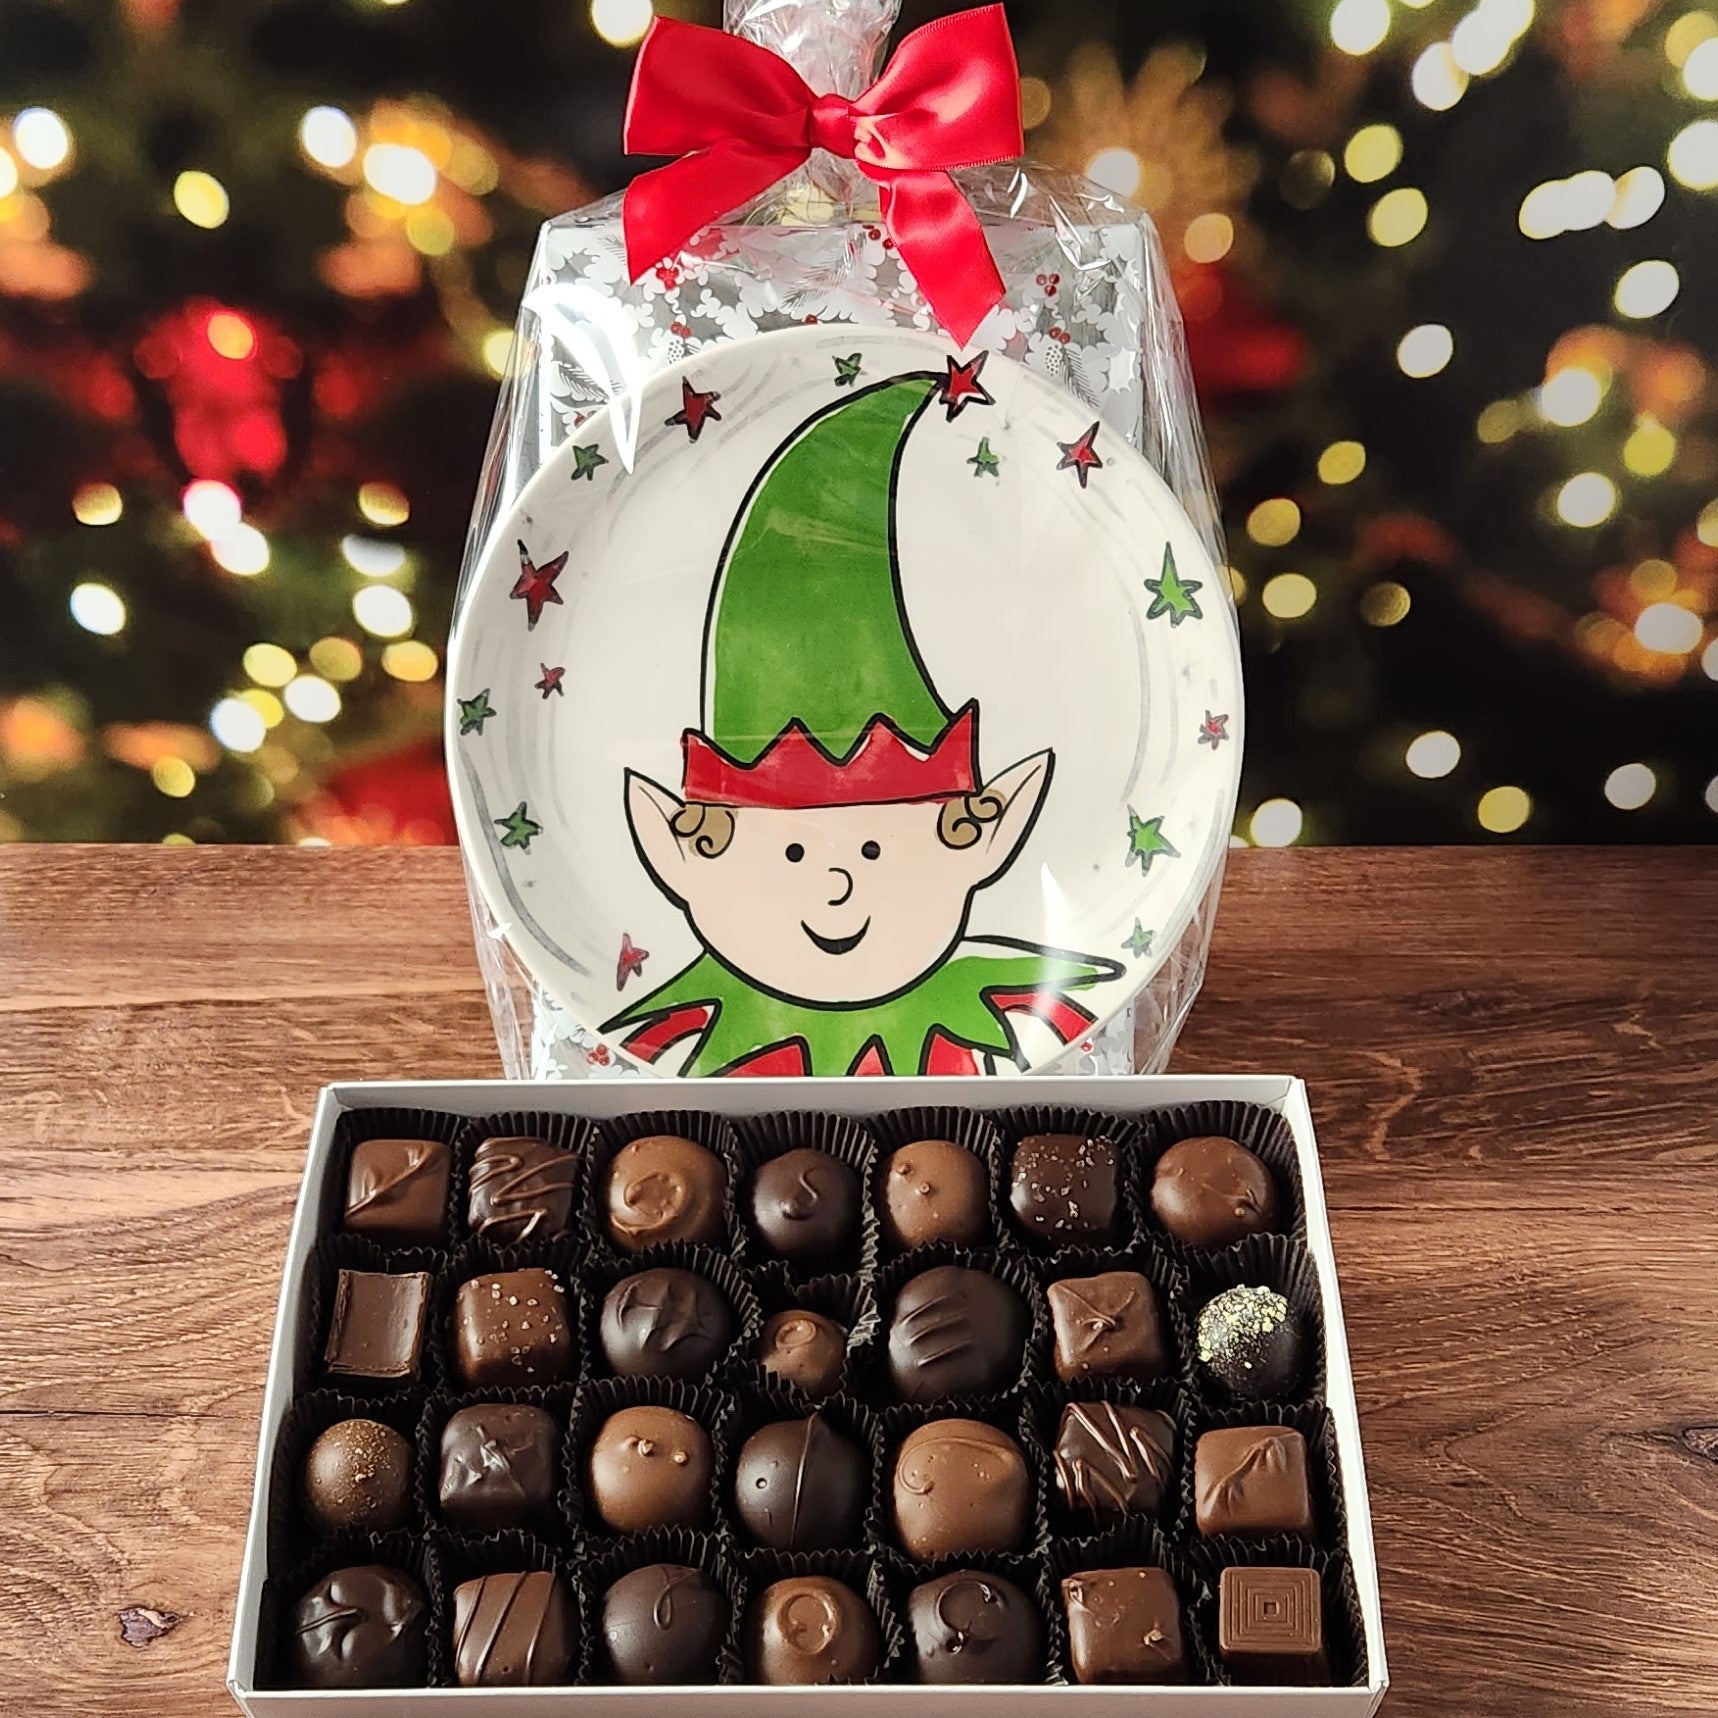 Festive Christmas Elf holiday plate with 28 piece milk and dark chocolate assortment from Stage Stop Candy